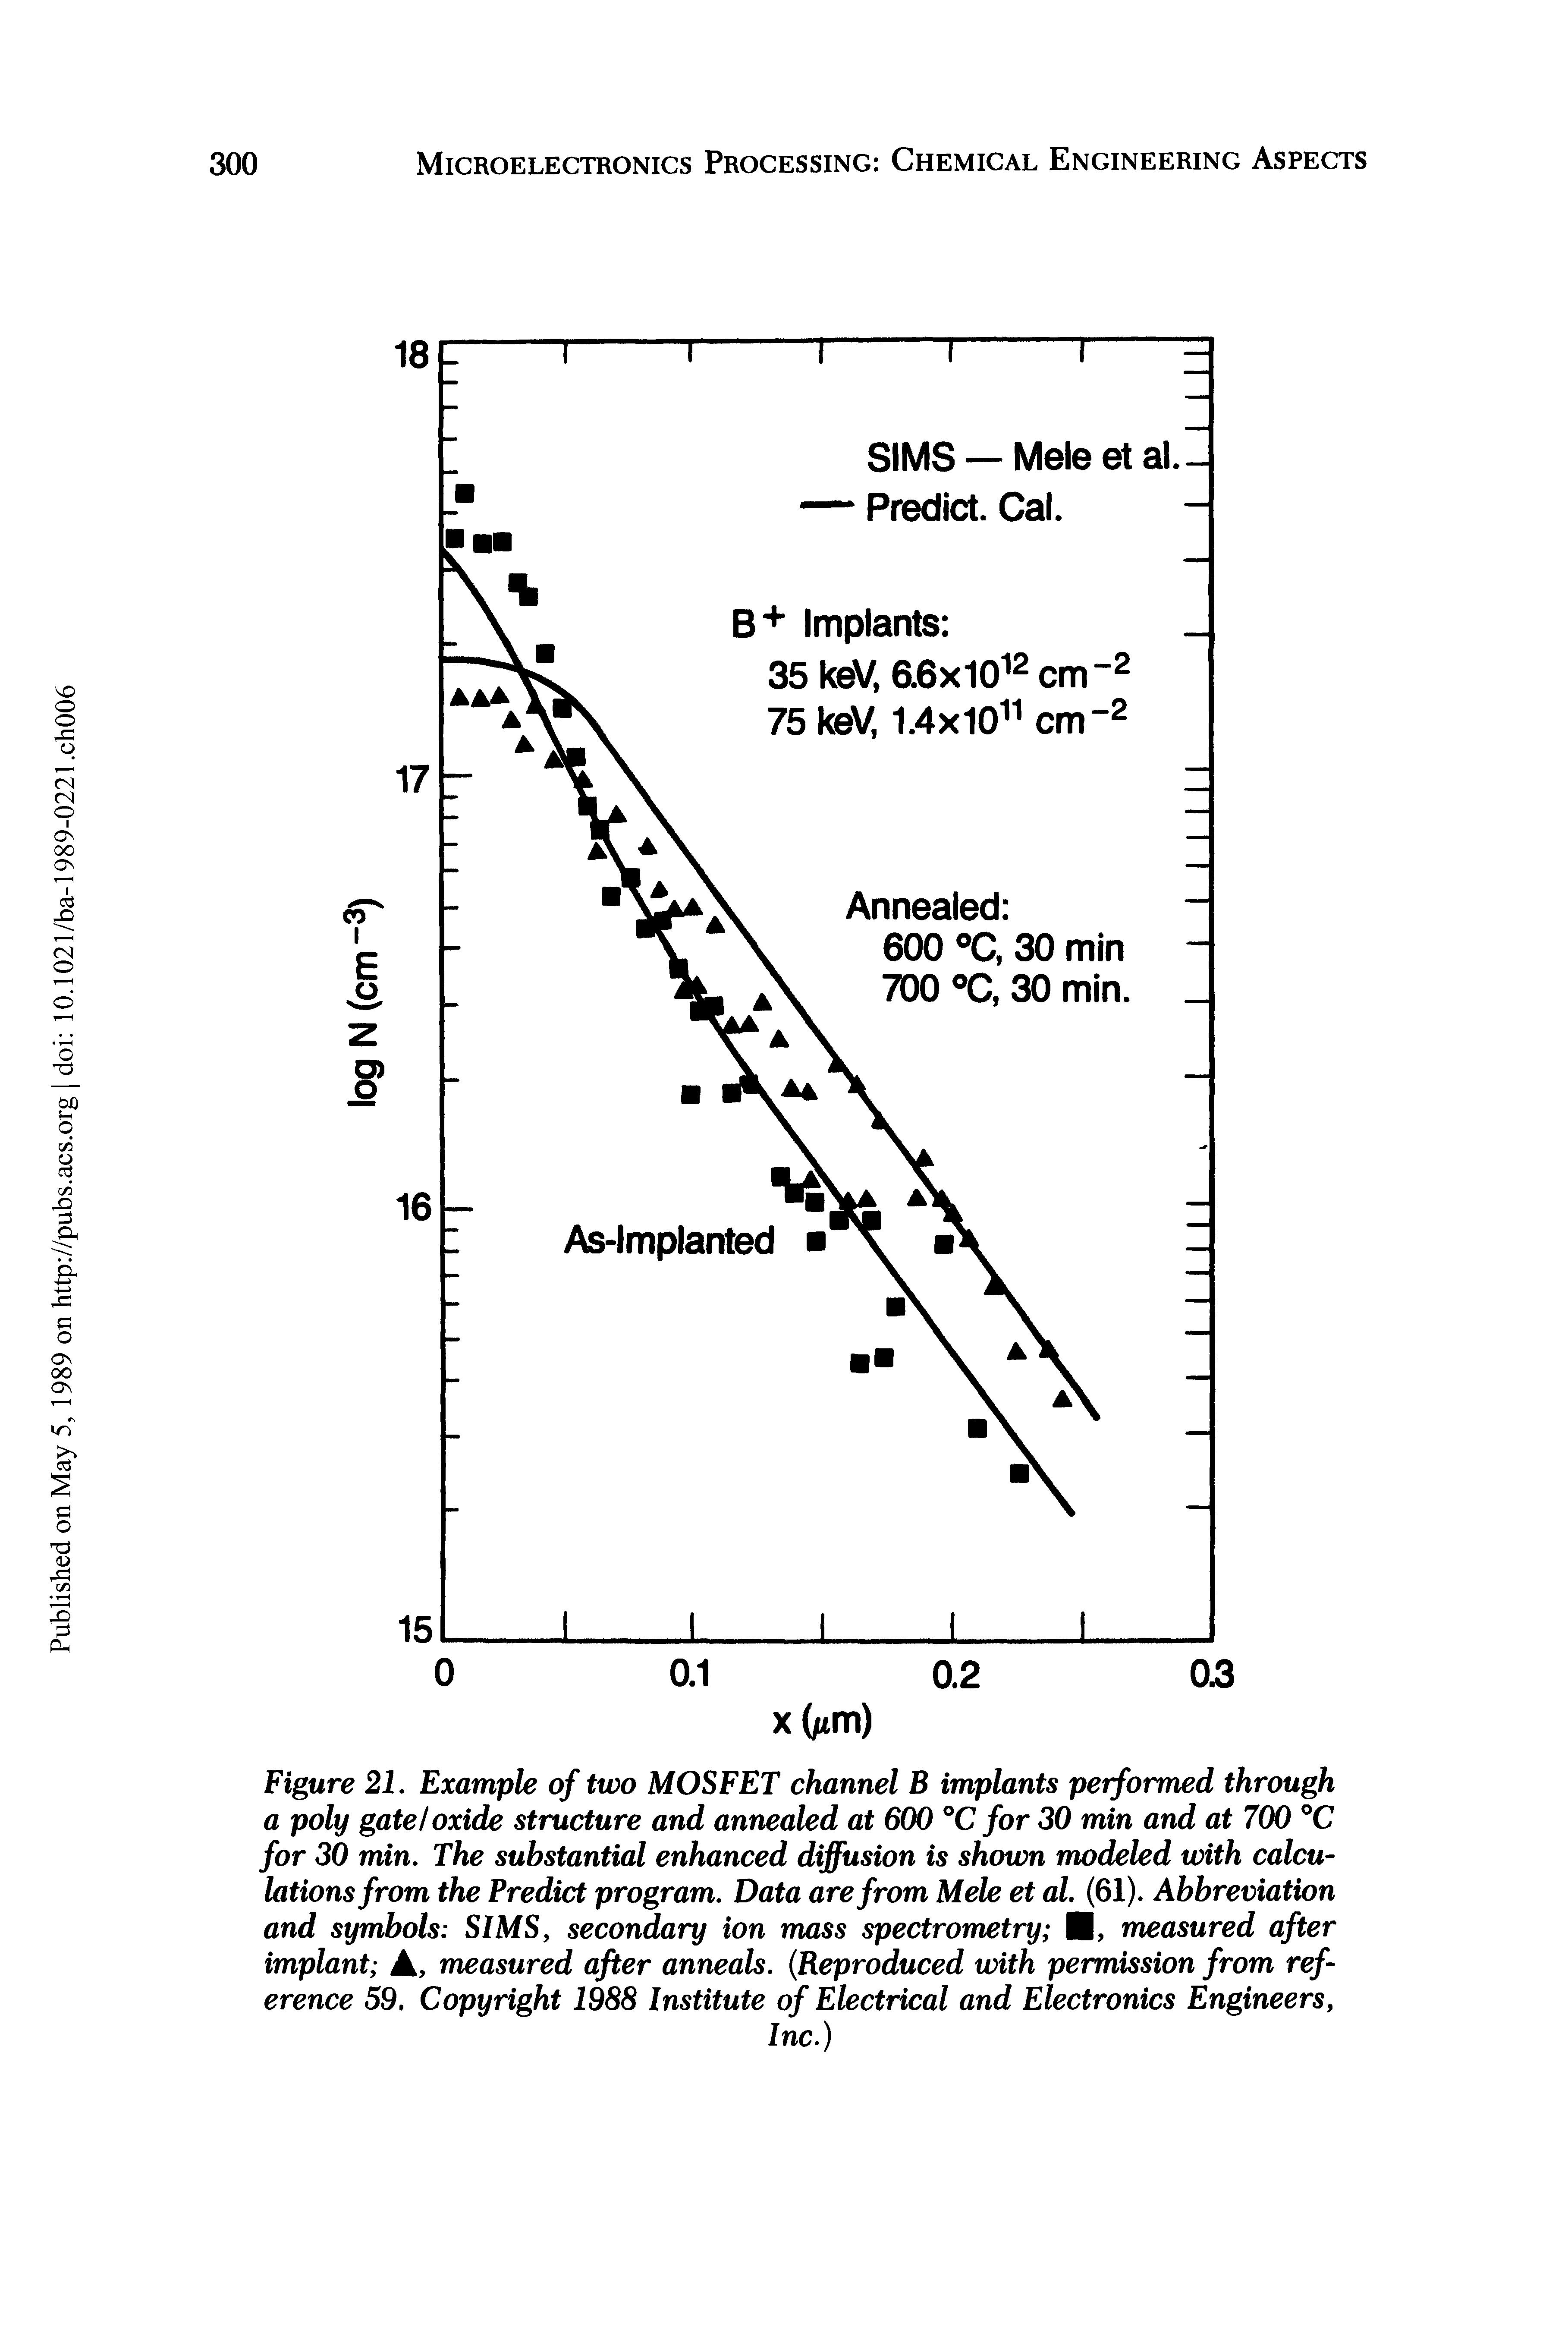 Figure 21. Example of two MOSFET channel B implants performed through a poly gate I oxide structure and annealed at 600 °C for 30 min and at 700 °C for 30 min. The substantial enhanced diffusion is shown modeled with calculations from the Predict program. Data are from Mele et al. (61). Abbreviation and symbols S/MS, secondary ion mass spectrometry I, measured after implant A, measured after anneals. (Reproduced with permission from reference 59. Copyright 1988 Institute of Electrical and Electronics Engineers,...